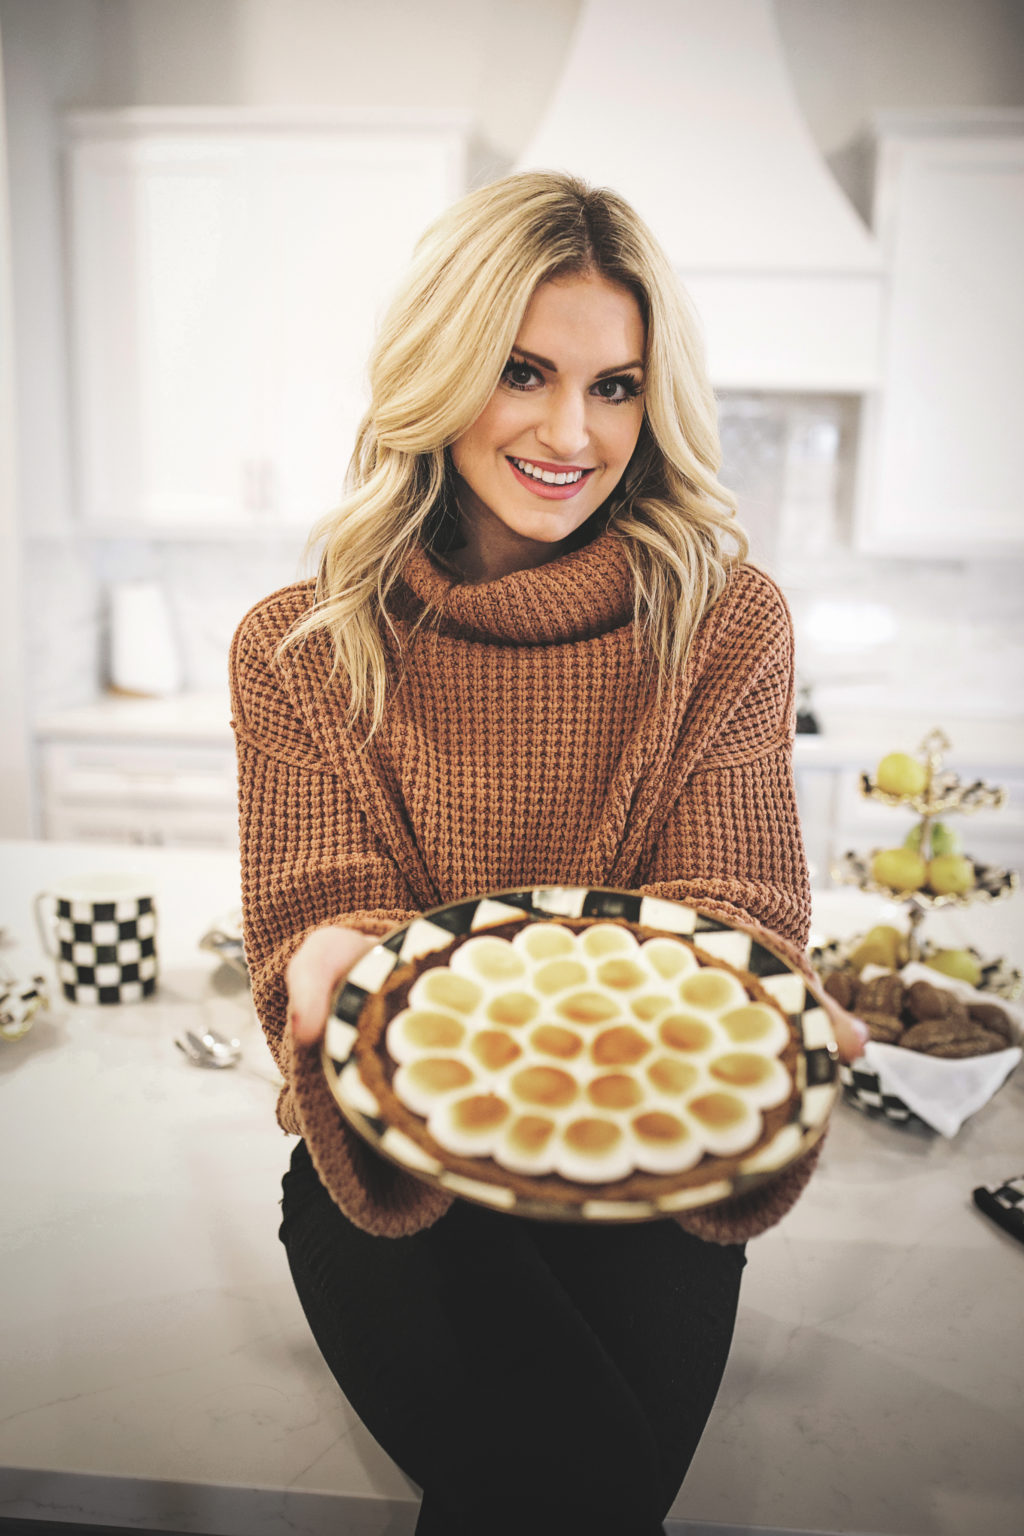 S'mores Pie Thanksgiving Side Dish